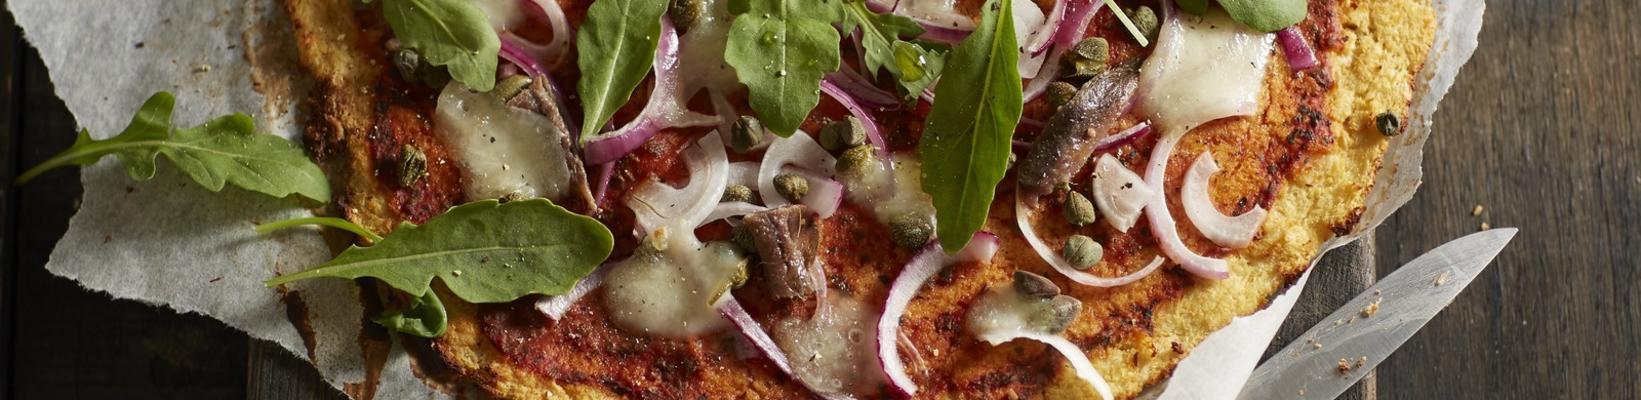 cauliflower pizza with red onion, capers and anchovies